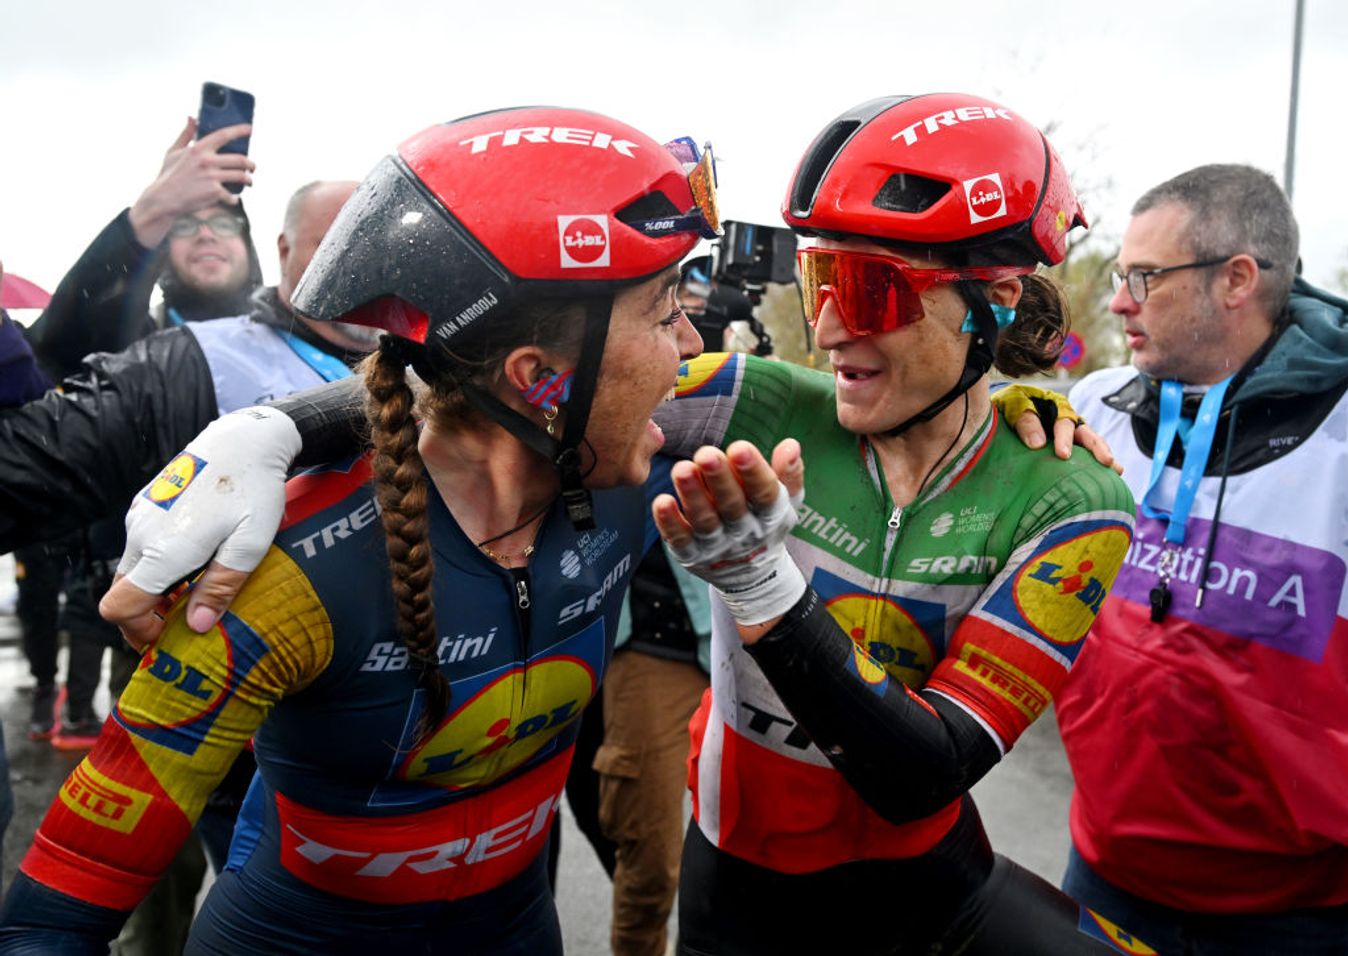 Van Anrooij celebrates with Elisa Longo Borghini at the finish of the Tour of Flanders